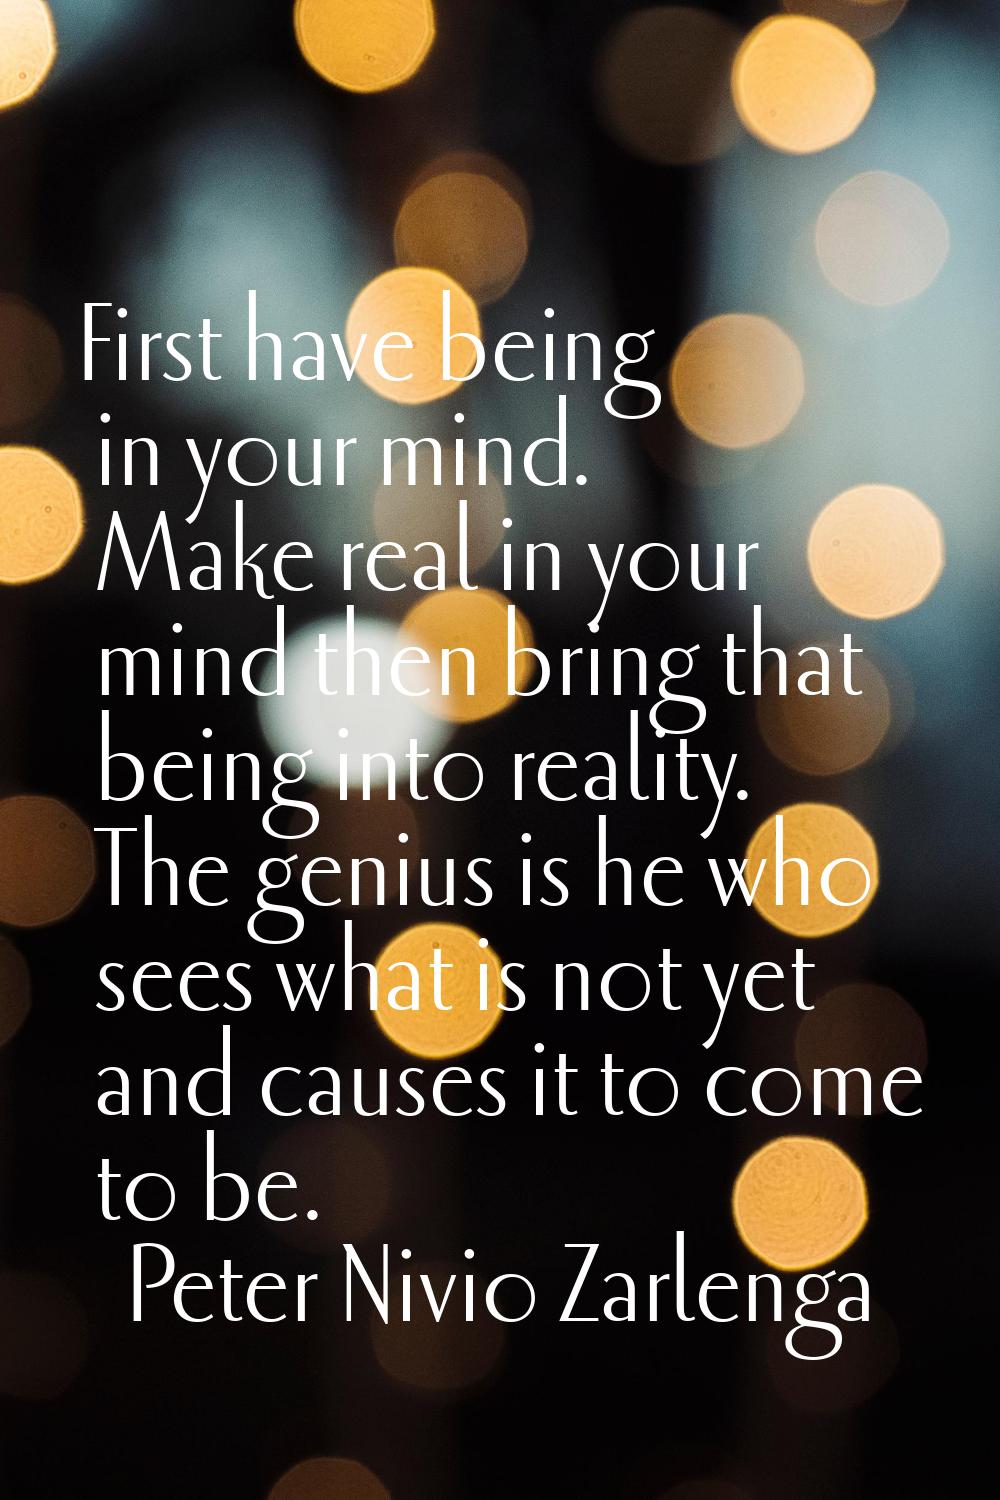 First have being in your mind. Make real in your mind then bring that being into reality. The geniu